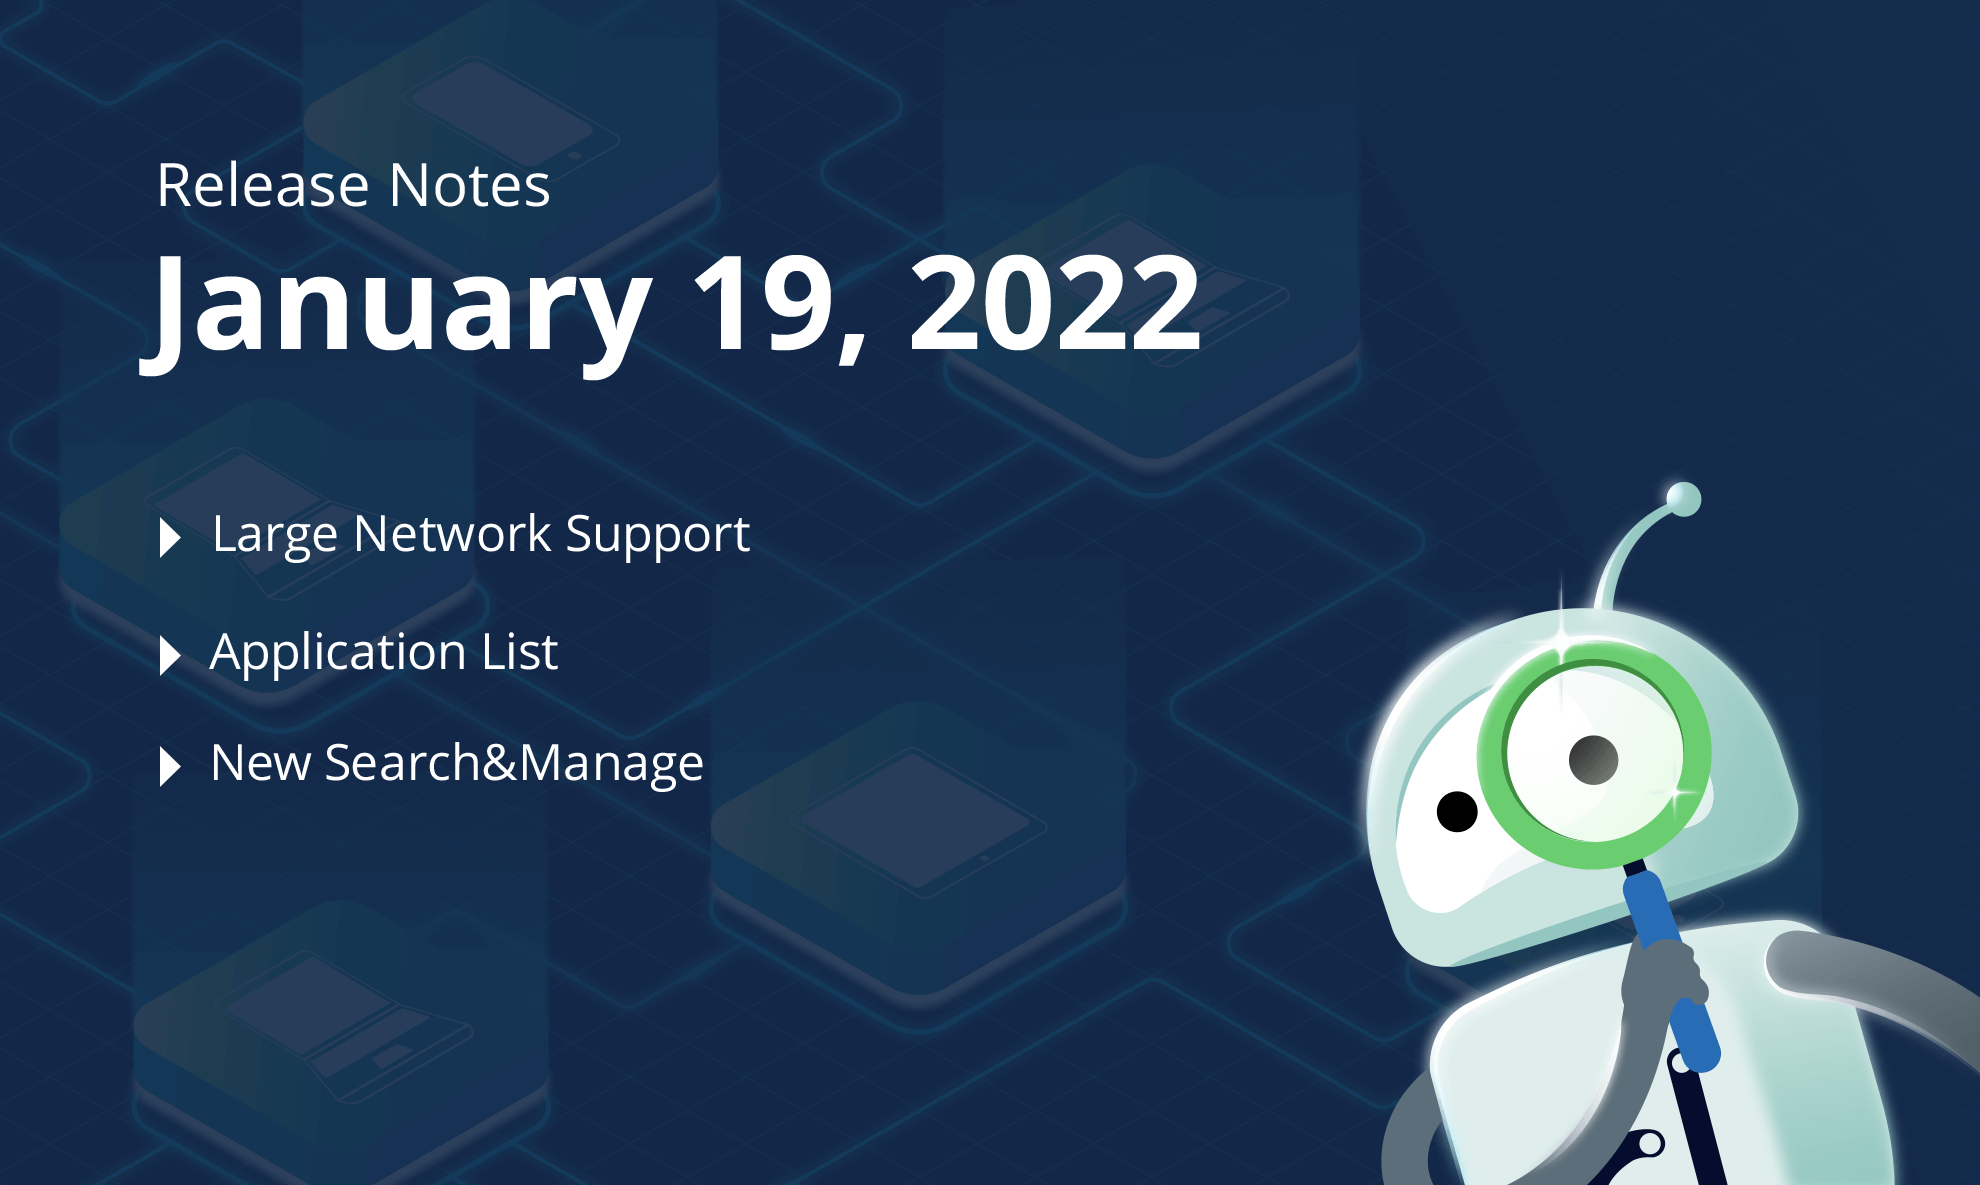 January 19, 2022 – Large Network Support, Application List, New Search&Manage